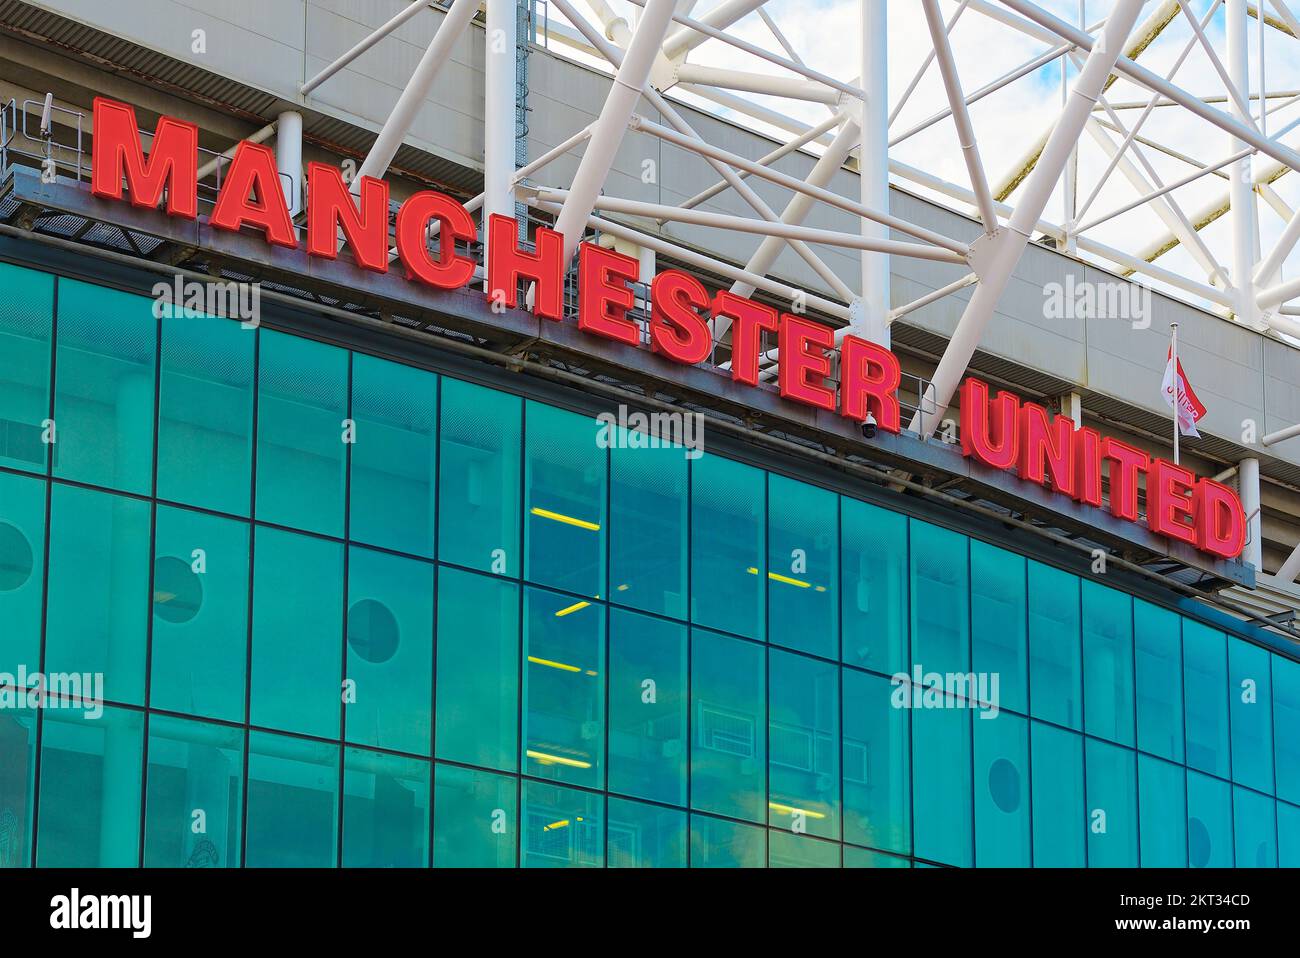 Manchester United Sign On the Clubs Old Trafford Stadium, Trafford, Manchester, Royaume-Uni Banque D'Images